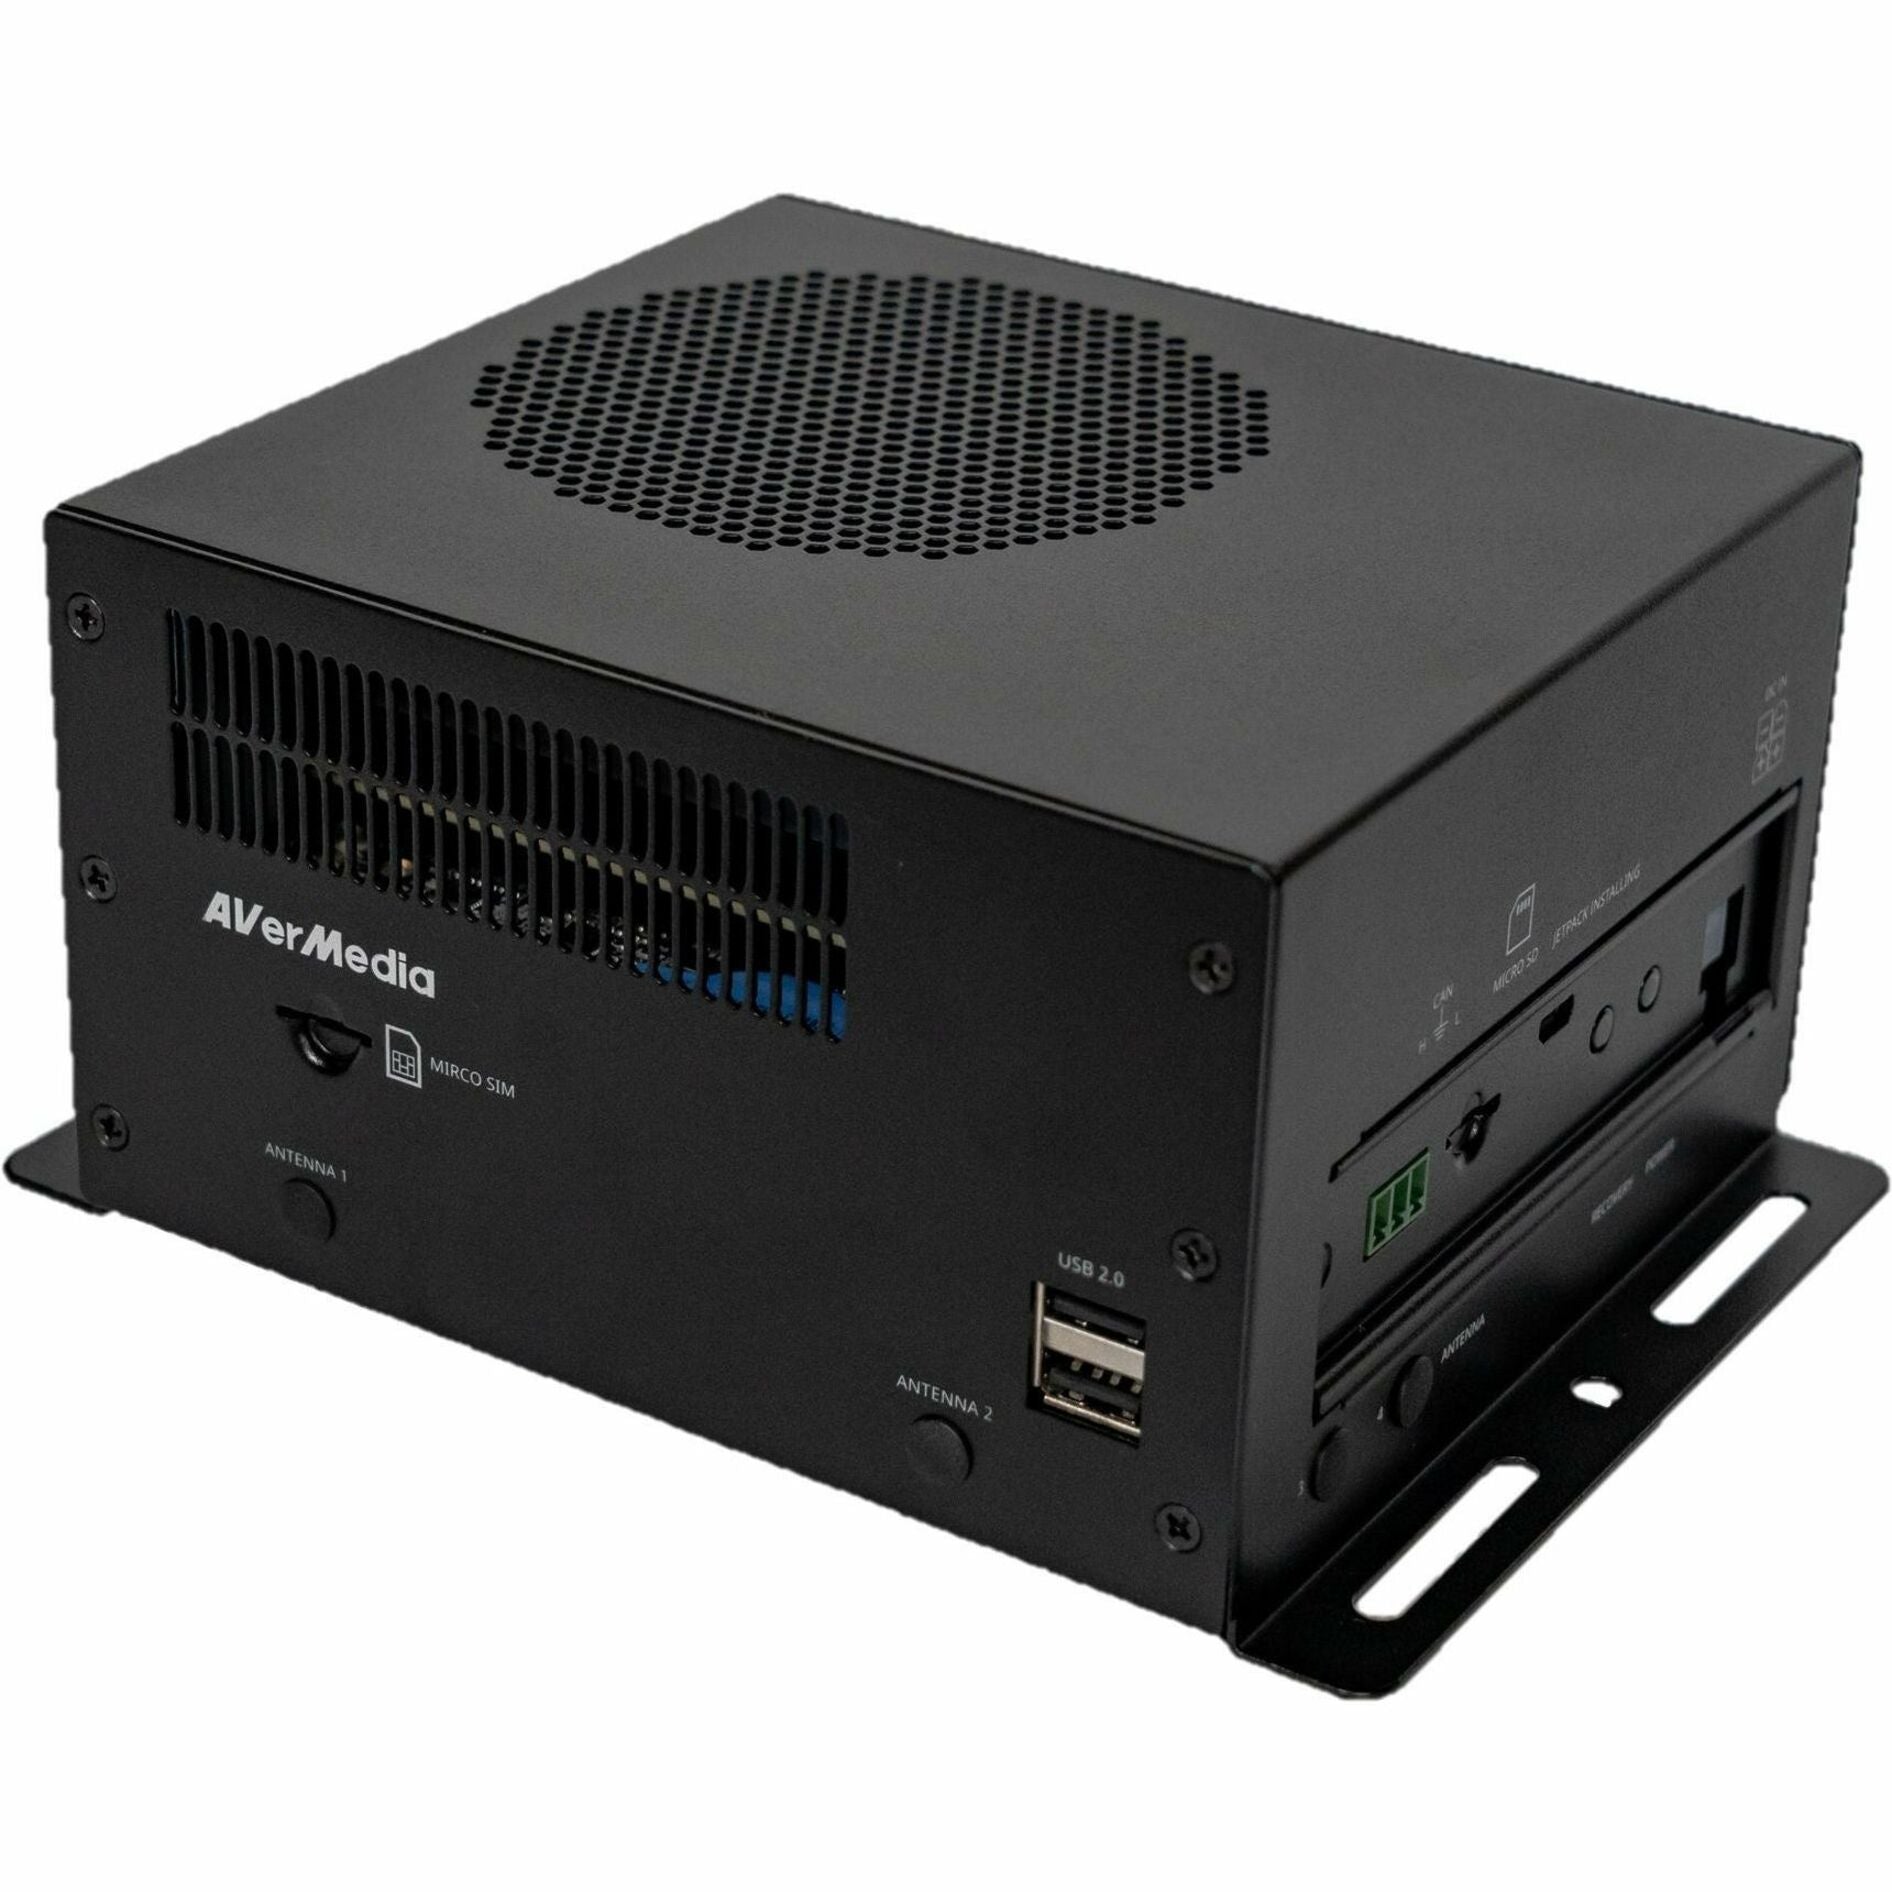 AVerMedia D315AOB-32GB Standard Box PC built with NVIDIA® Jetson AGX Orin Module Video Surveillance System, 32GB Storage, USB, HDMI, Wired Connectivity